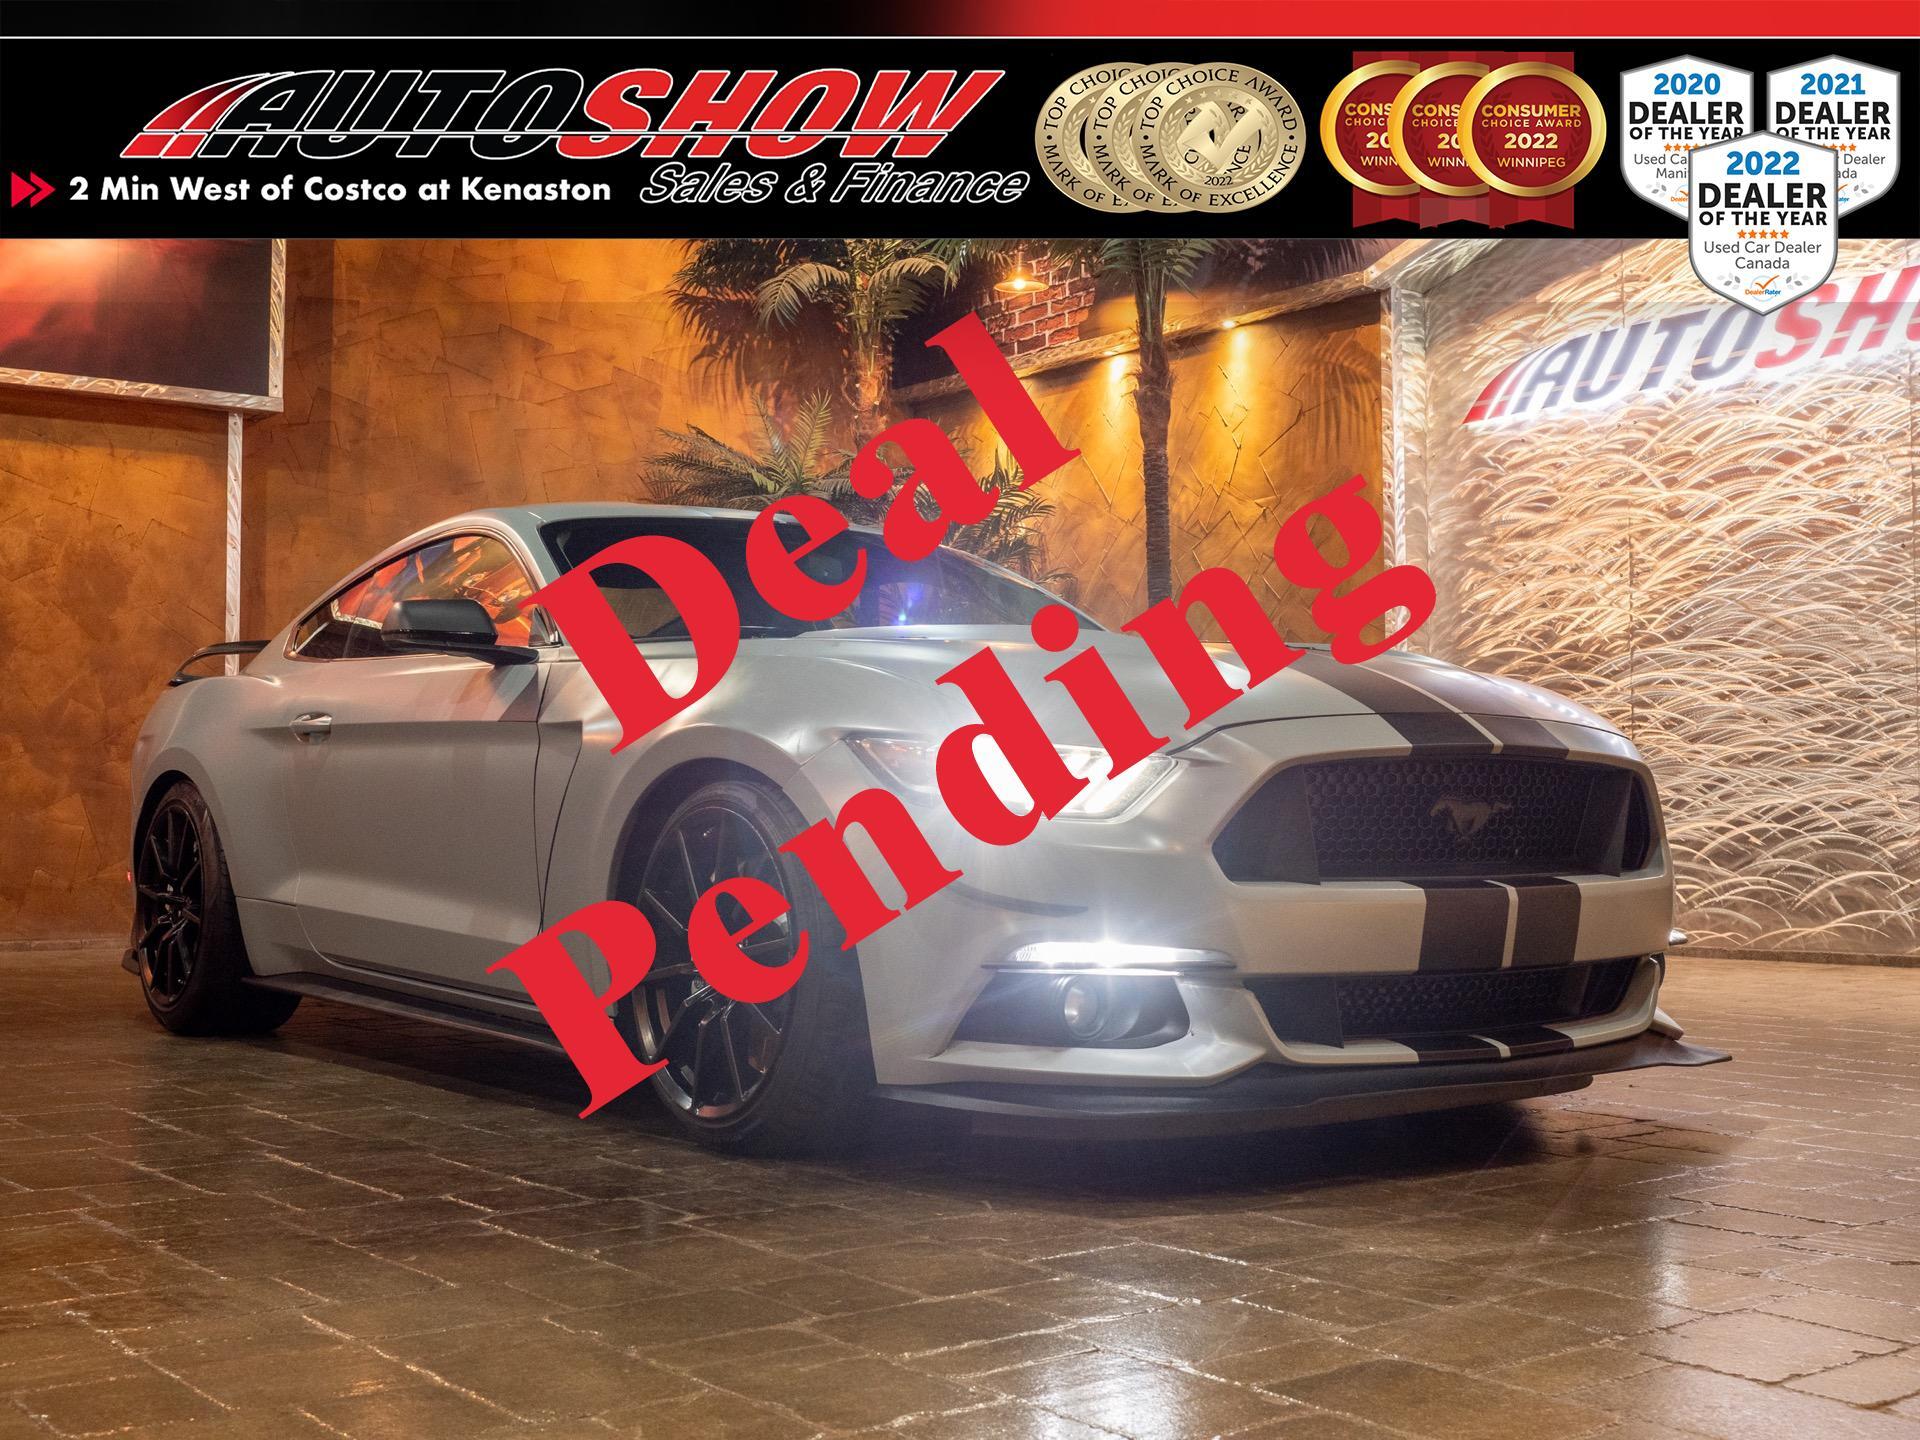 2015 Ford Mustang Shelby Clone - Perf Pkg, Brembos, Nav, Big Mods!